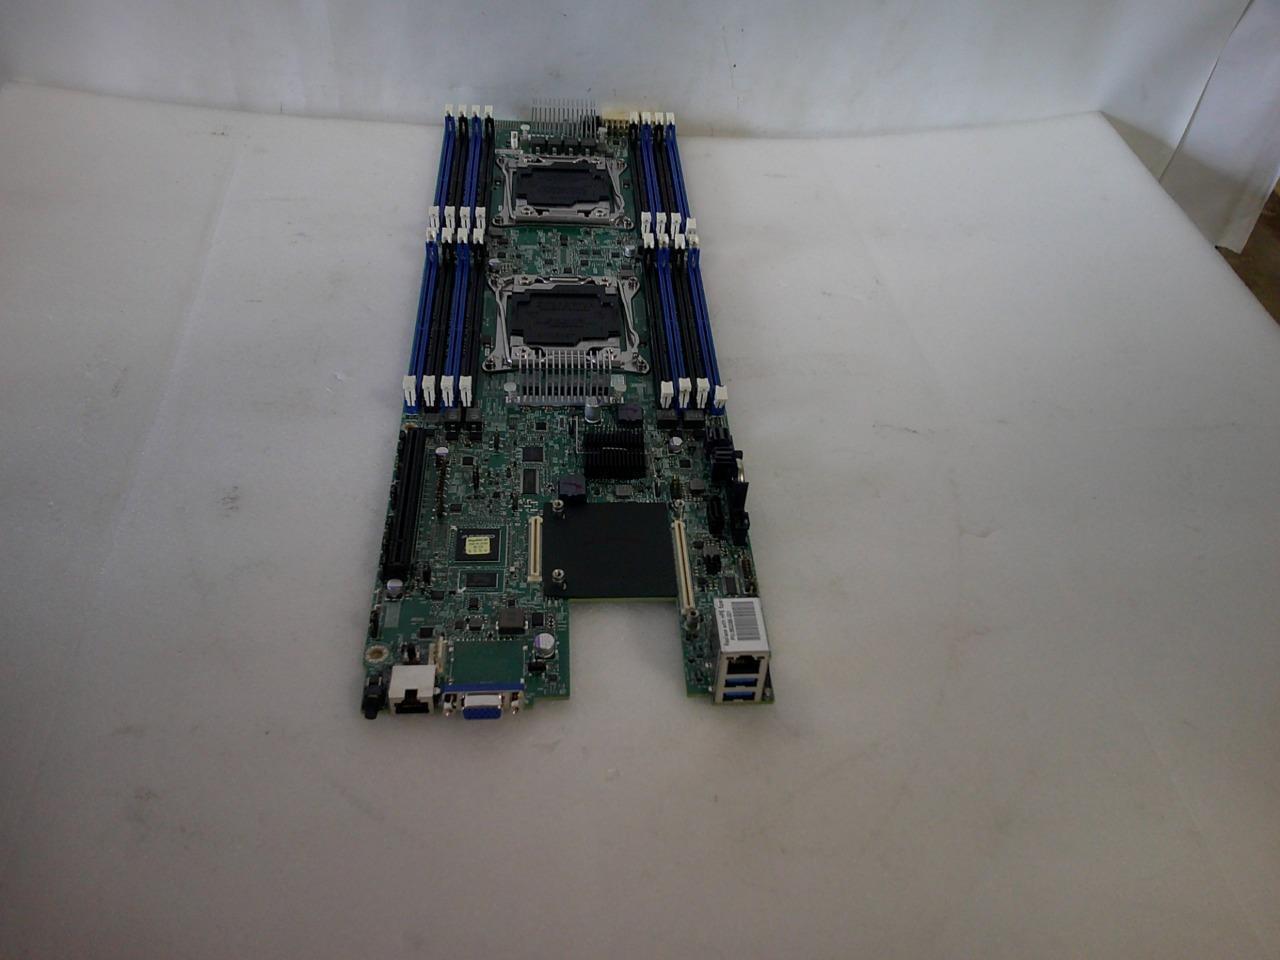 HPE Cloudline CL3100 G3 DDR4 Motherboard 1A42AC700-600-G